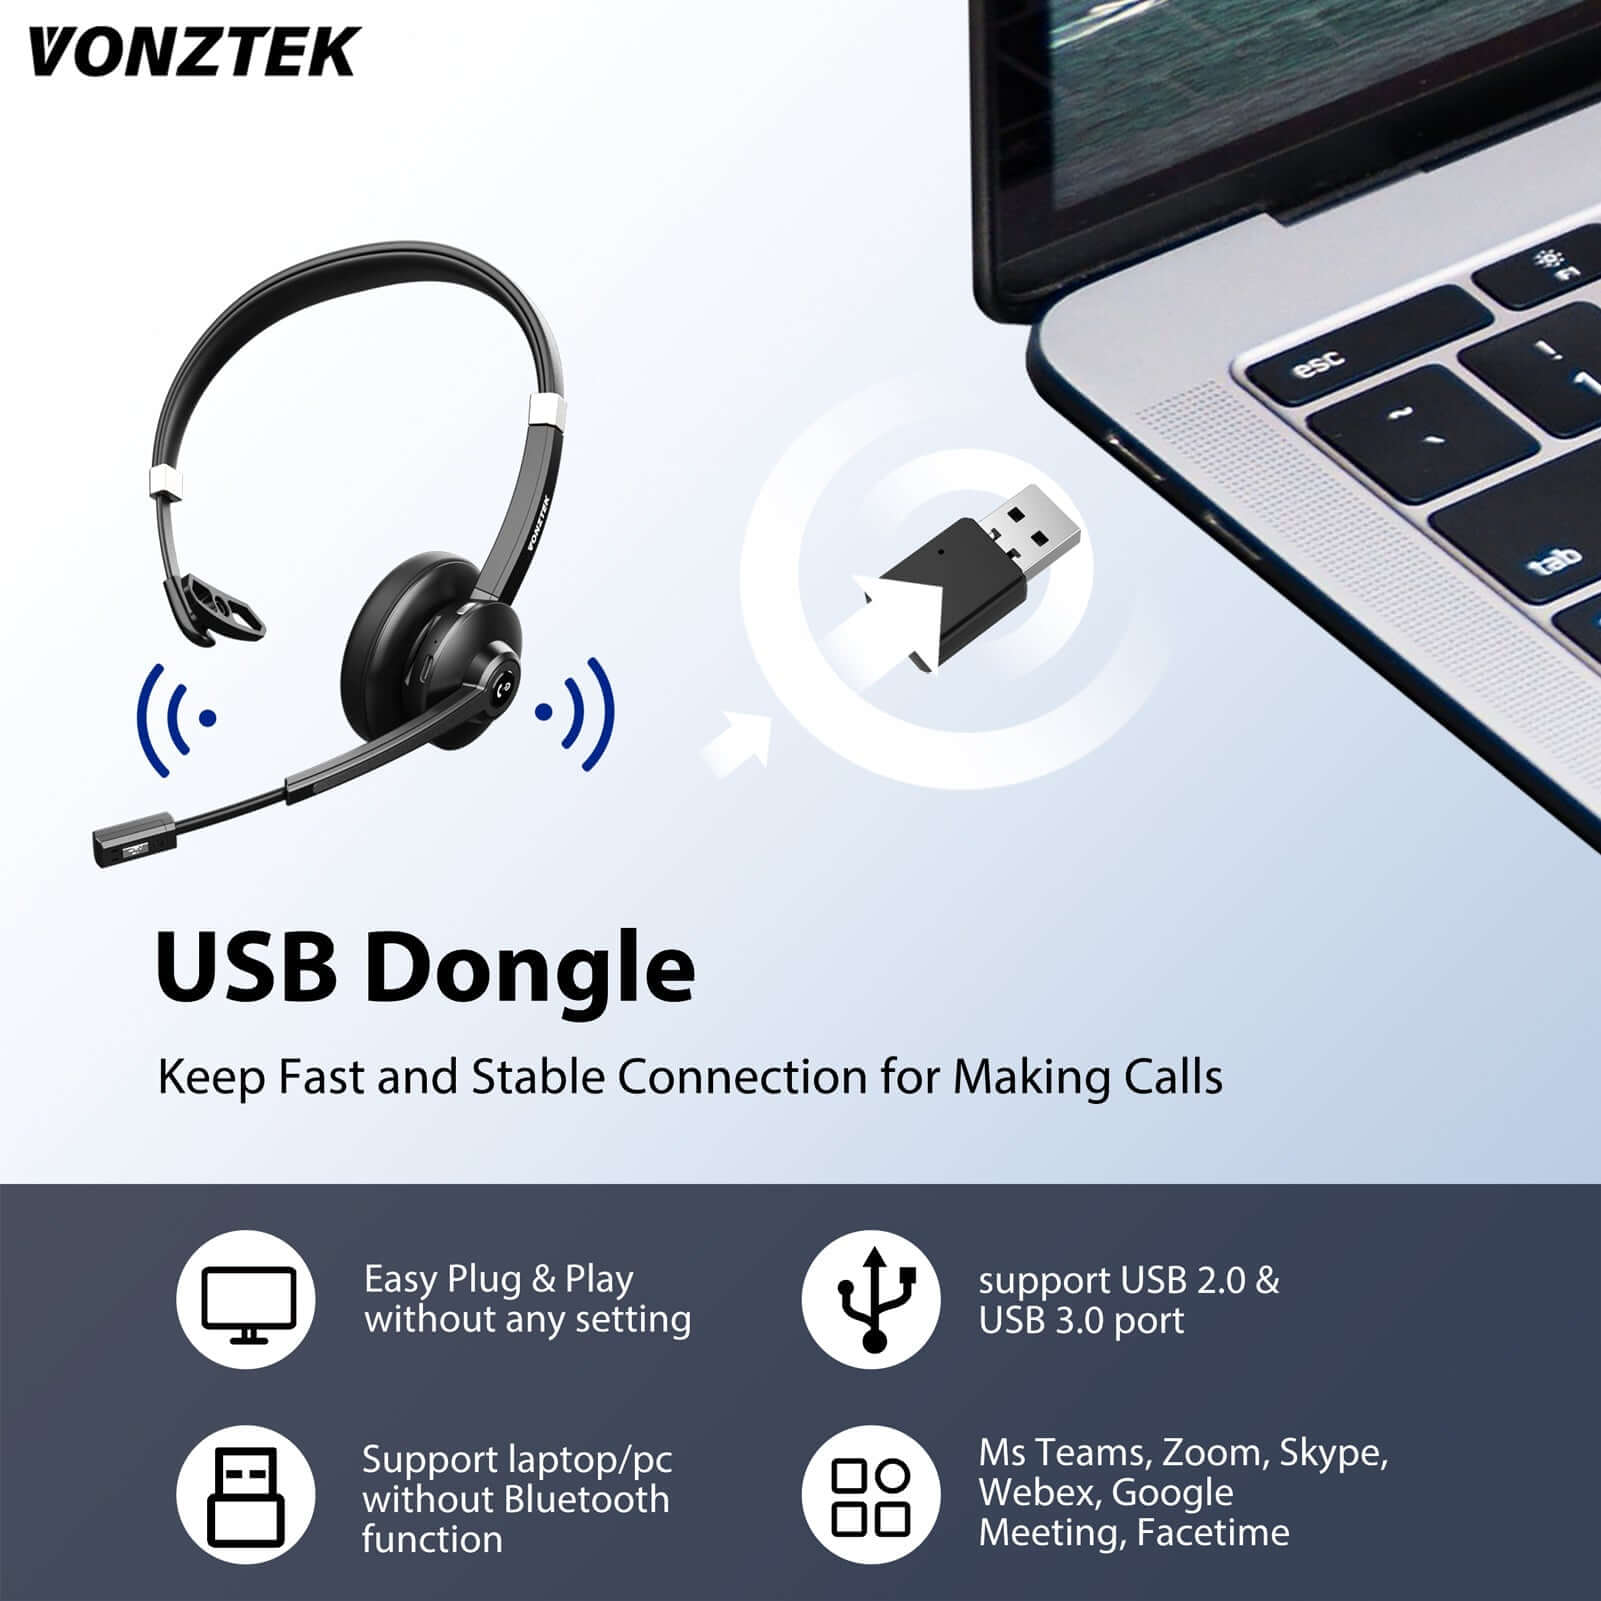 USB dongle,keep fast and stable connection for making calls,Easy plug&play without any setting,Support USB 2.0 & USB 3.0 port,Support laptop/pc without bluetooth function,Ms teams,Zoom,Skype,Webex,Google Meeting,Facetime.